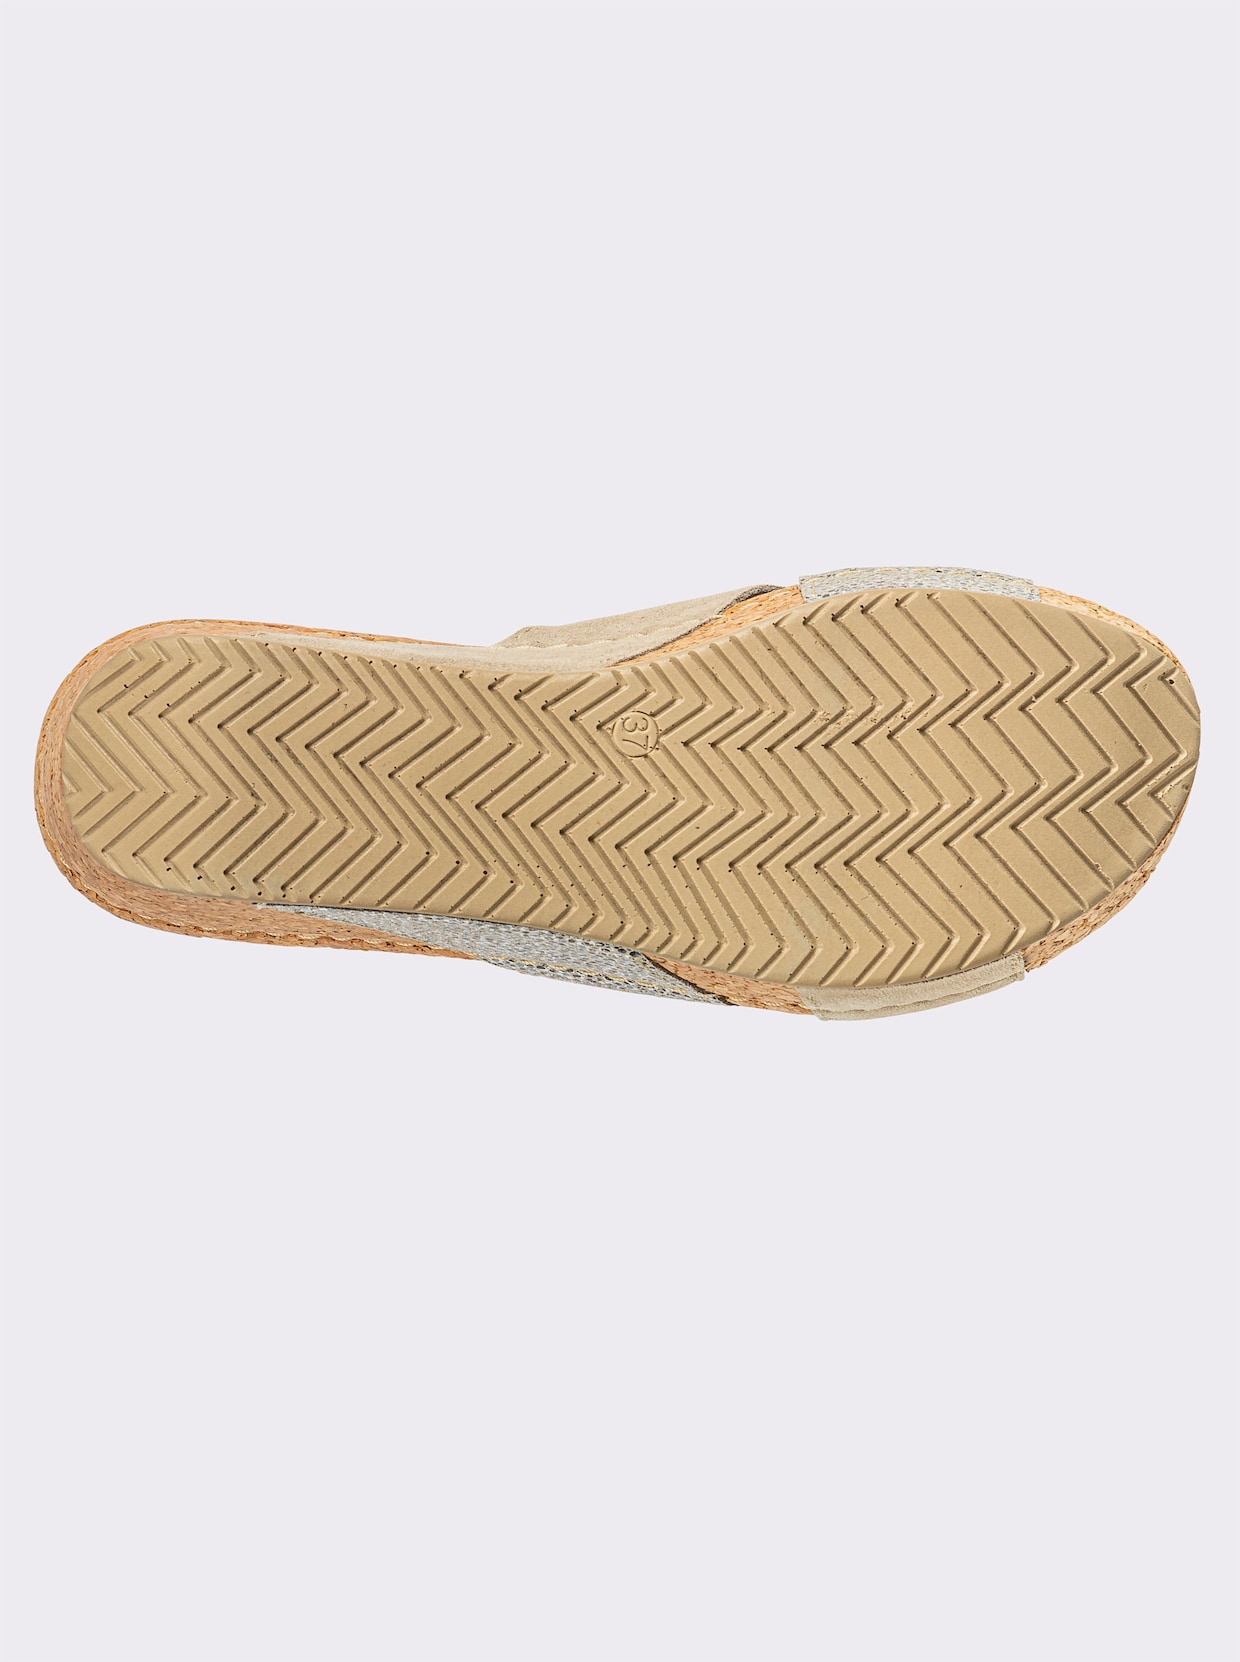 Dr. Feet slippers - taupe